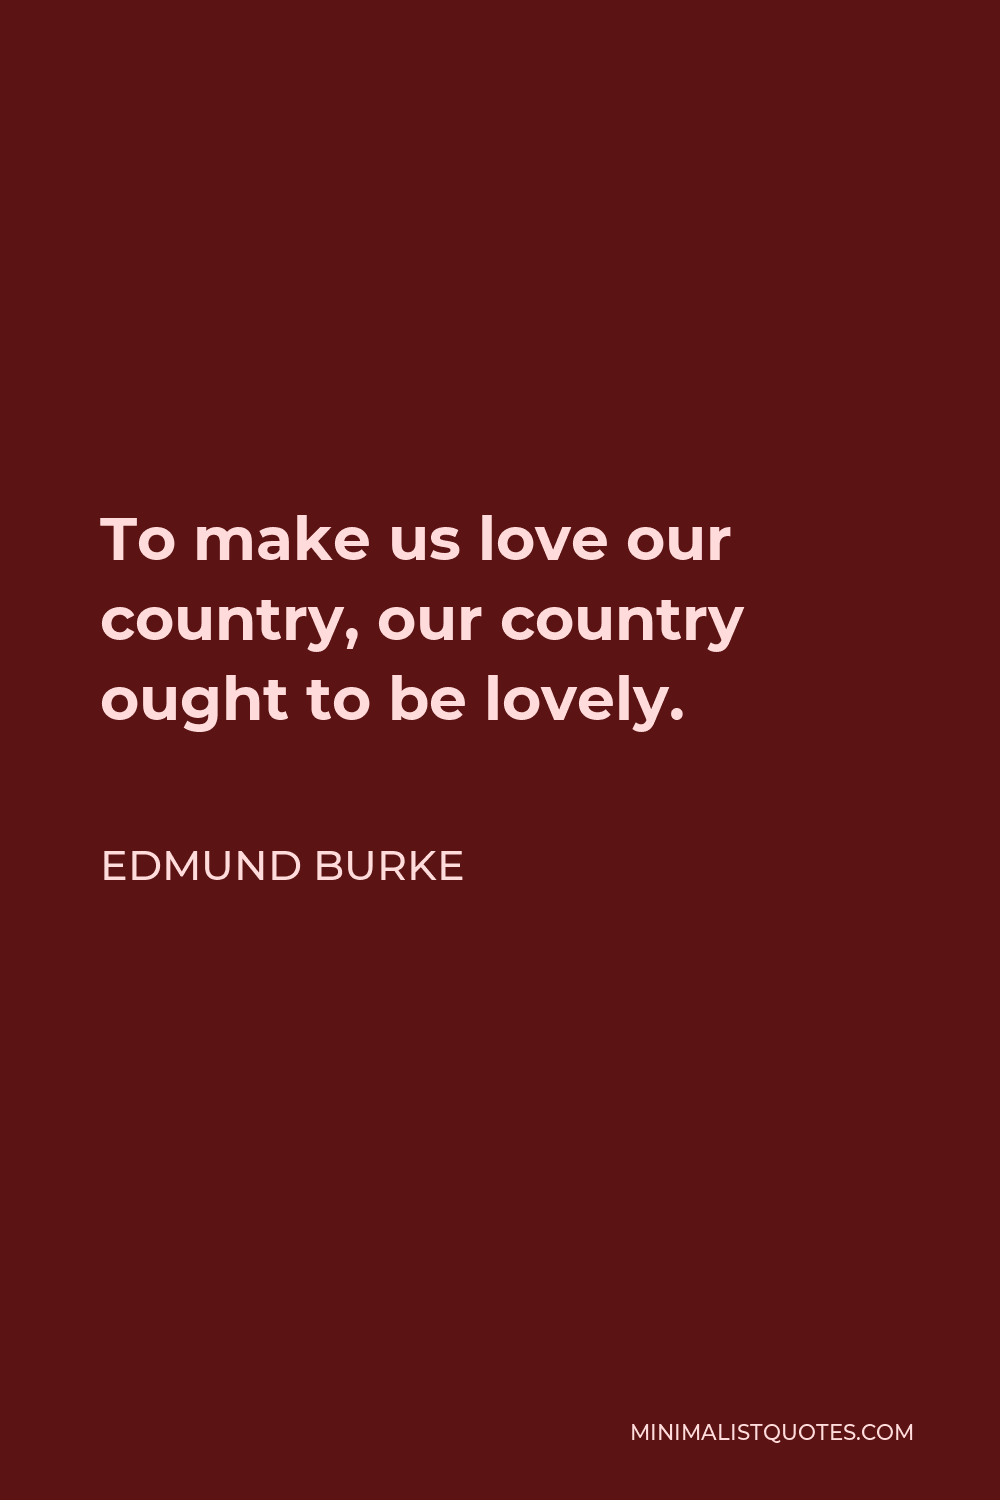 Edmund Burke Quote - To make us love our country, our country ought to be lovely.